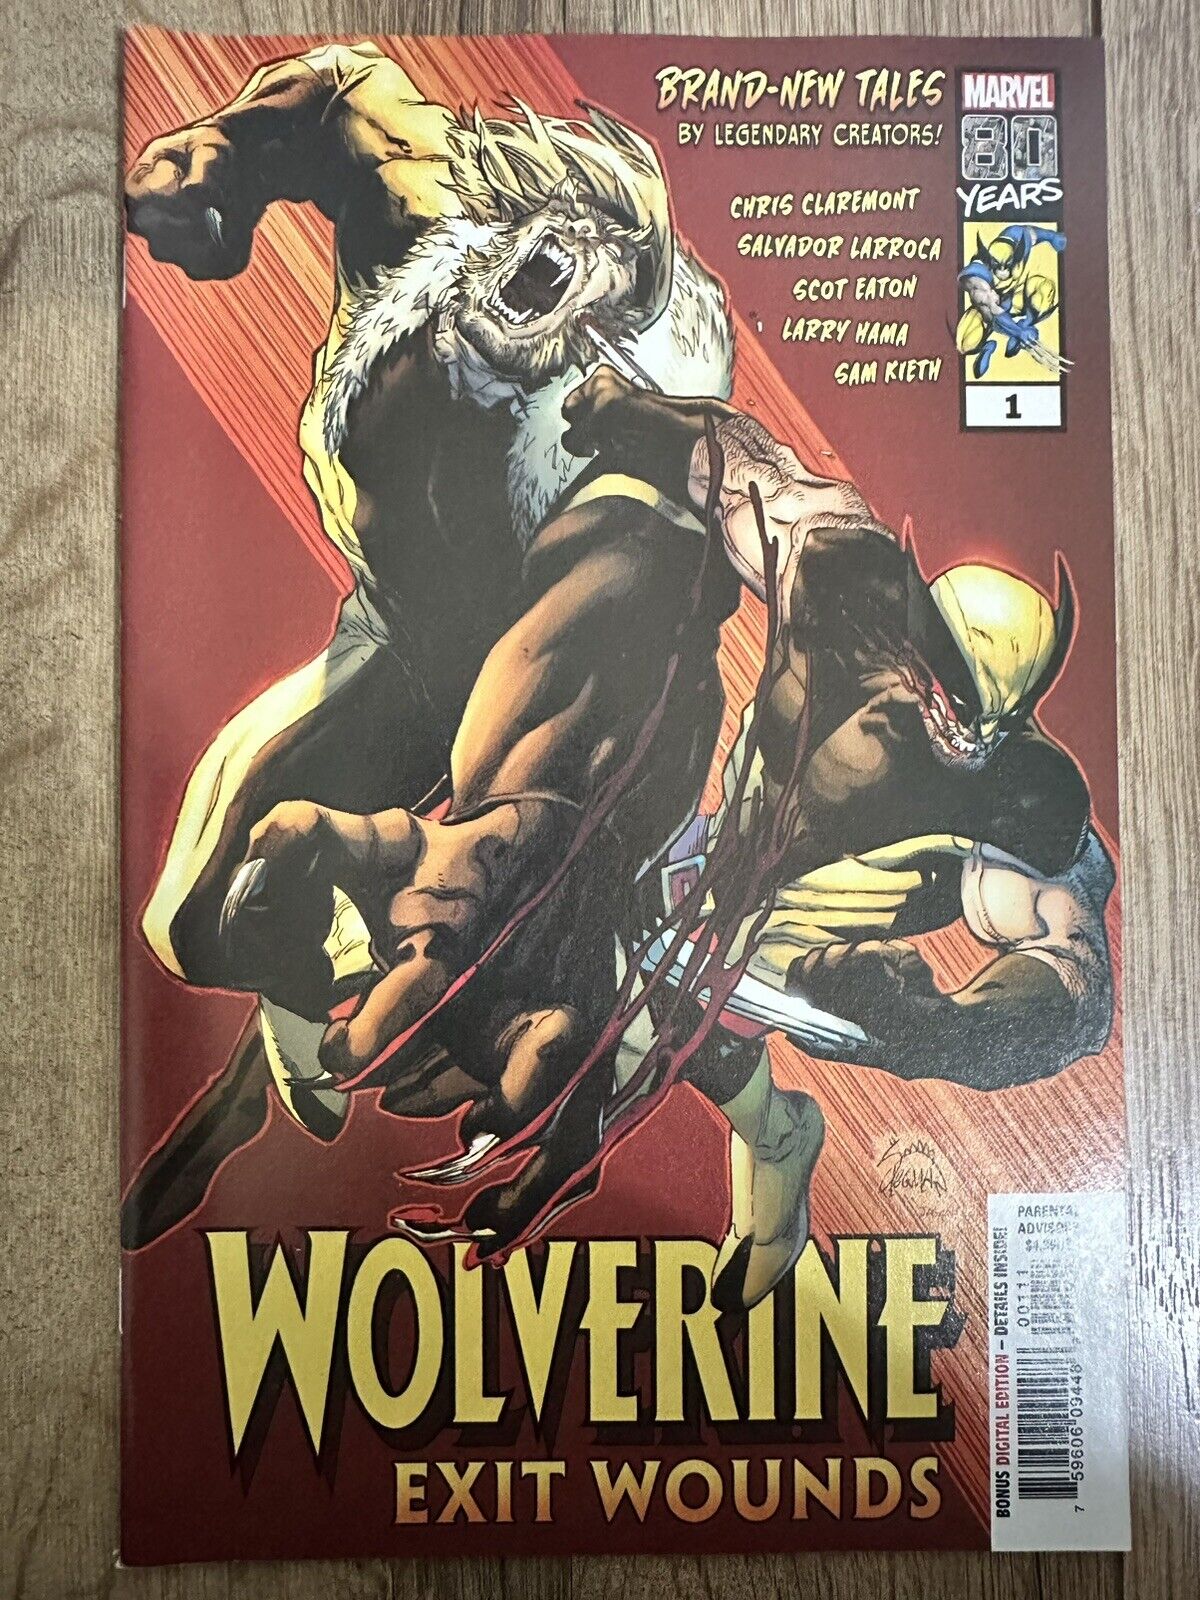 WOLVERINE EXIT WOUNDS # 1 (2019) NM ONE SHOT - STEGMAN COVER A {F8}